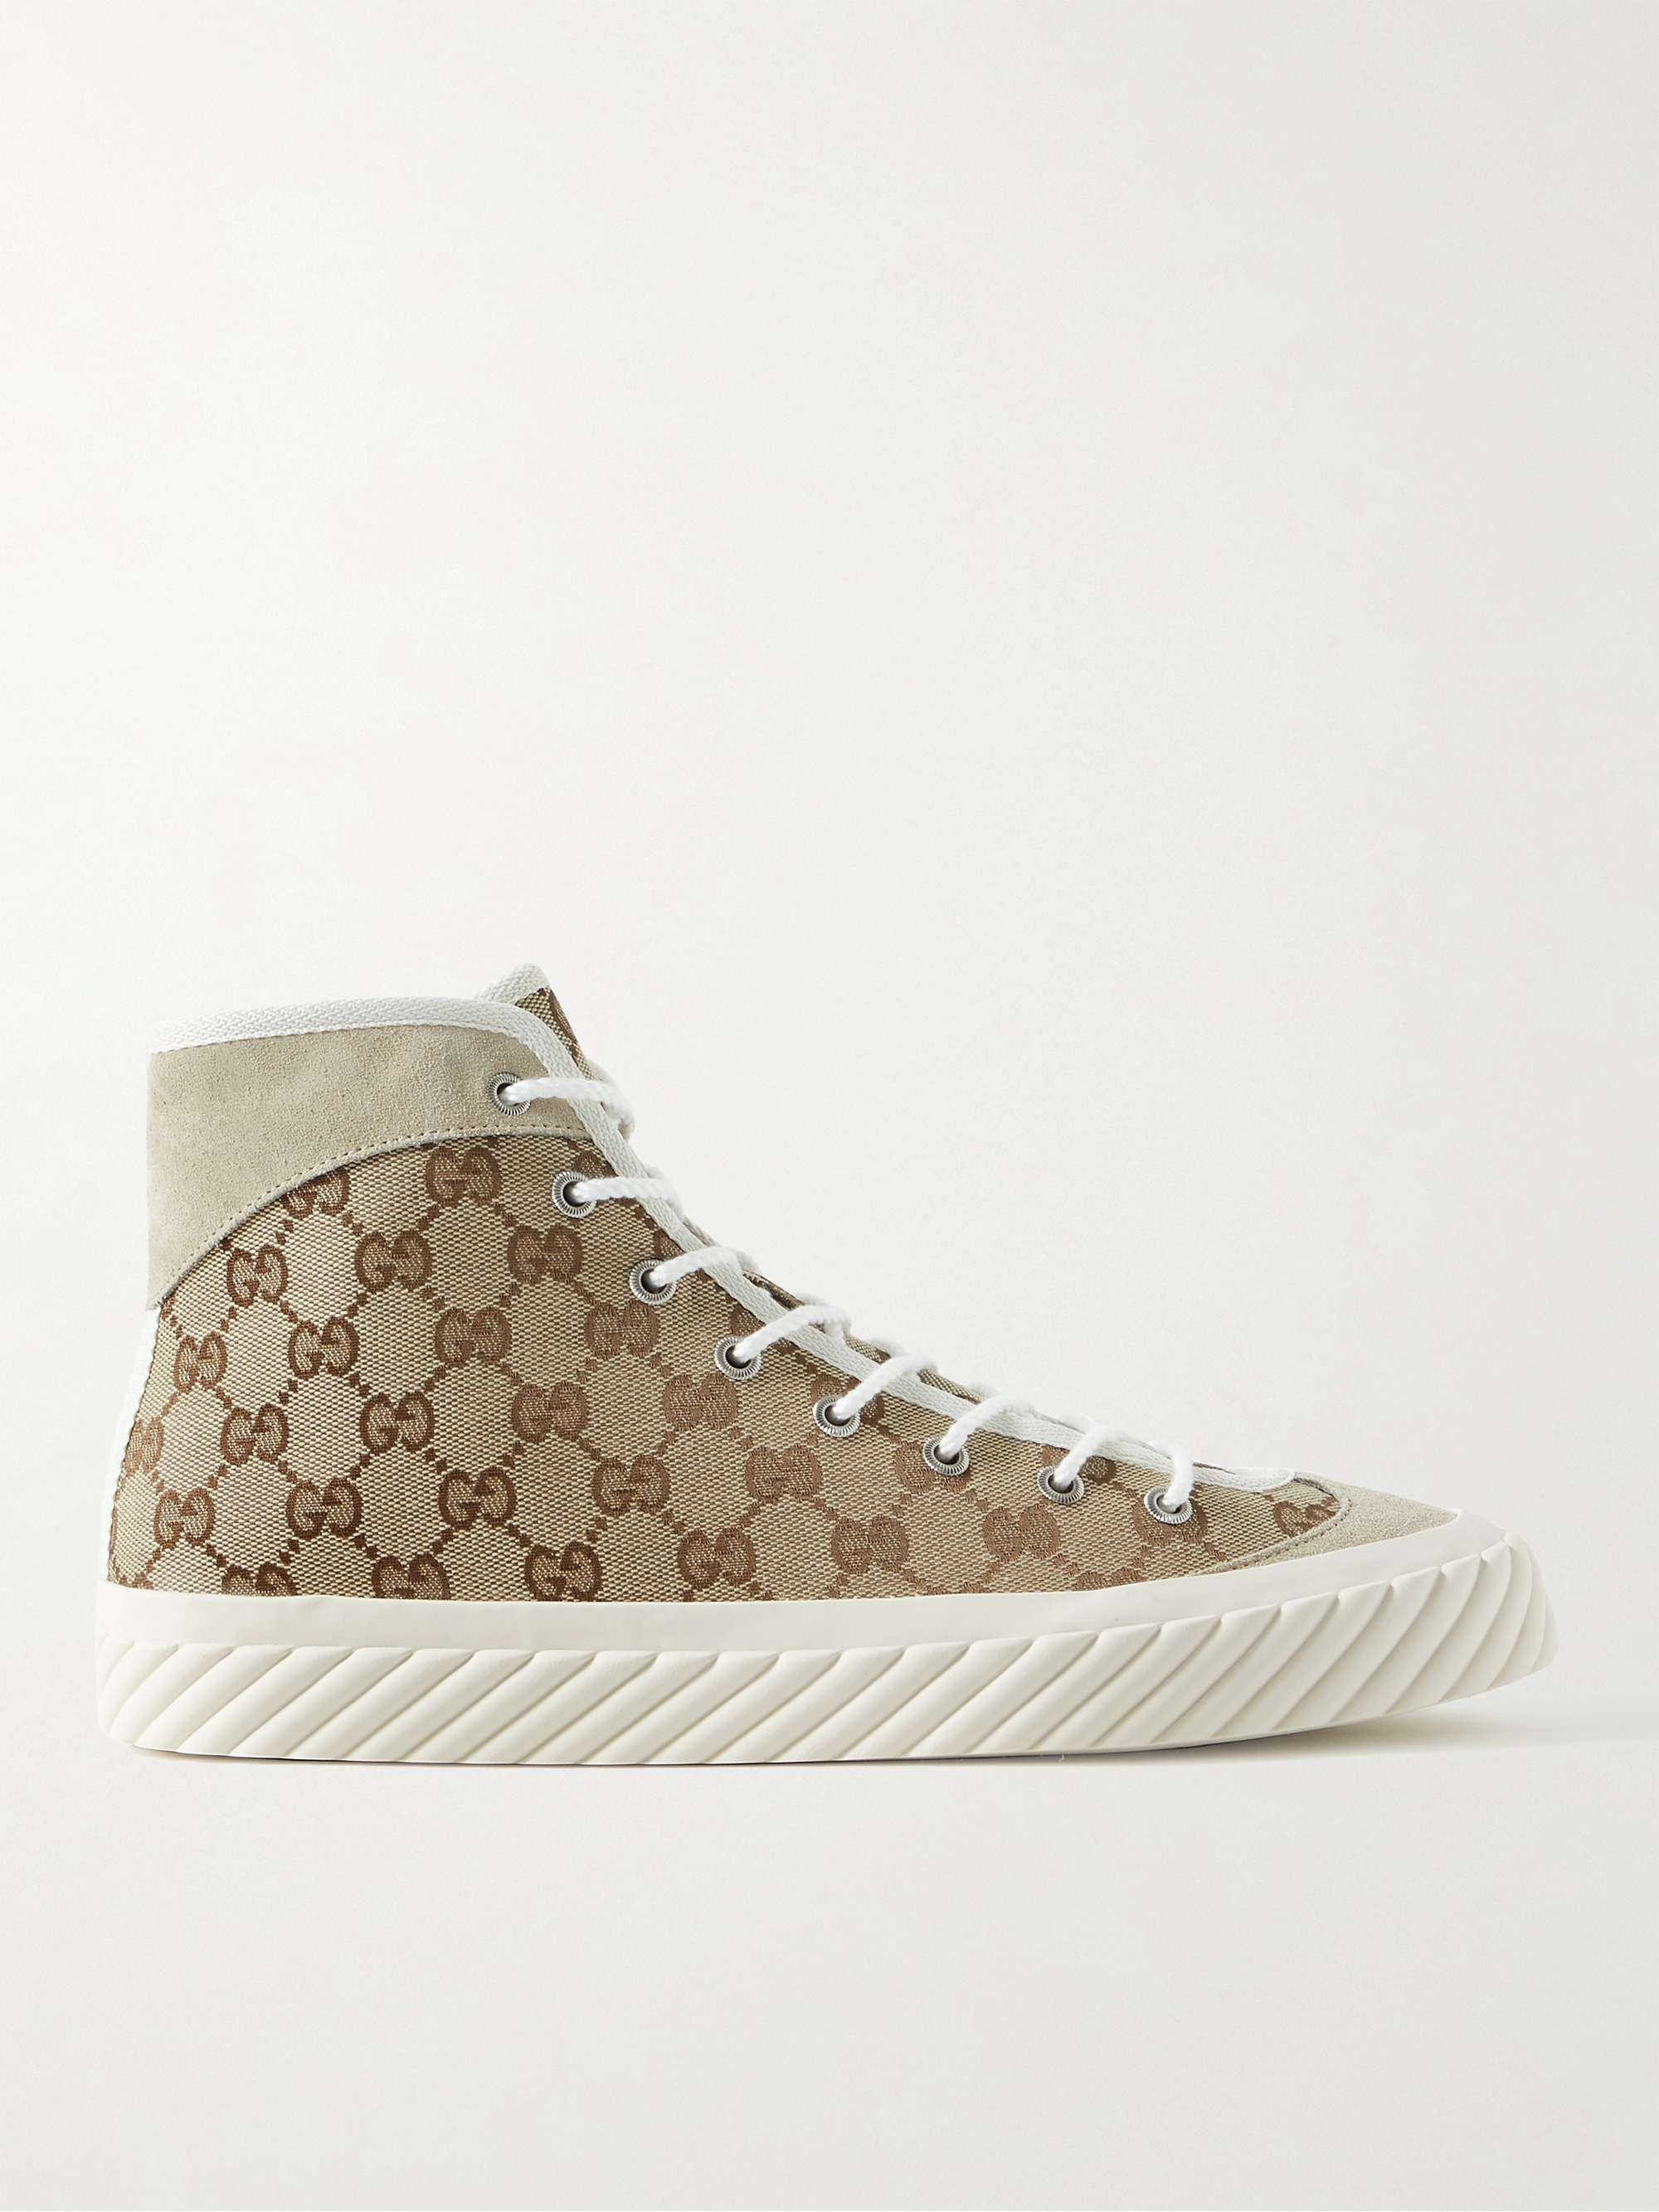 GUCCI Suede-Trimmed Monogrammed Canvas High-Top Sneakers